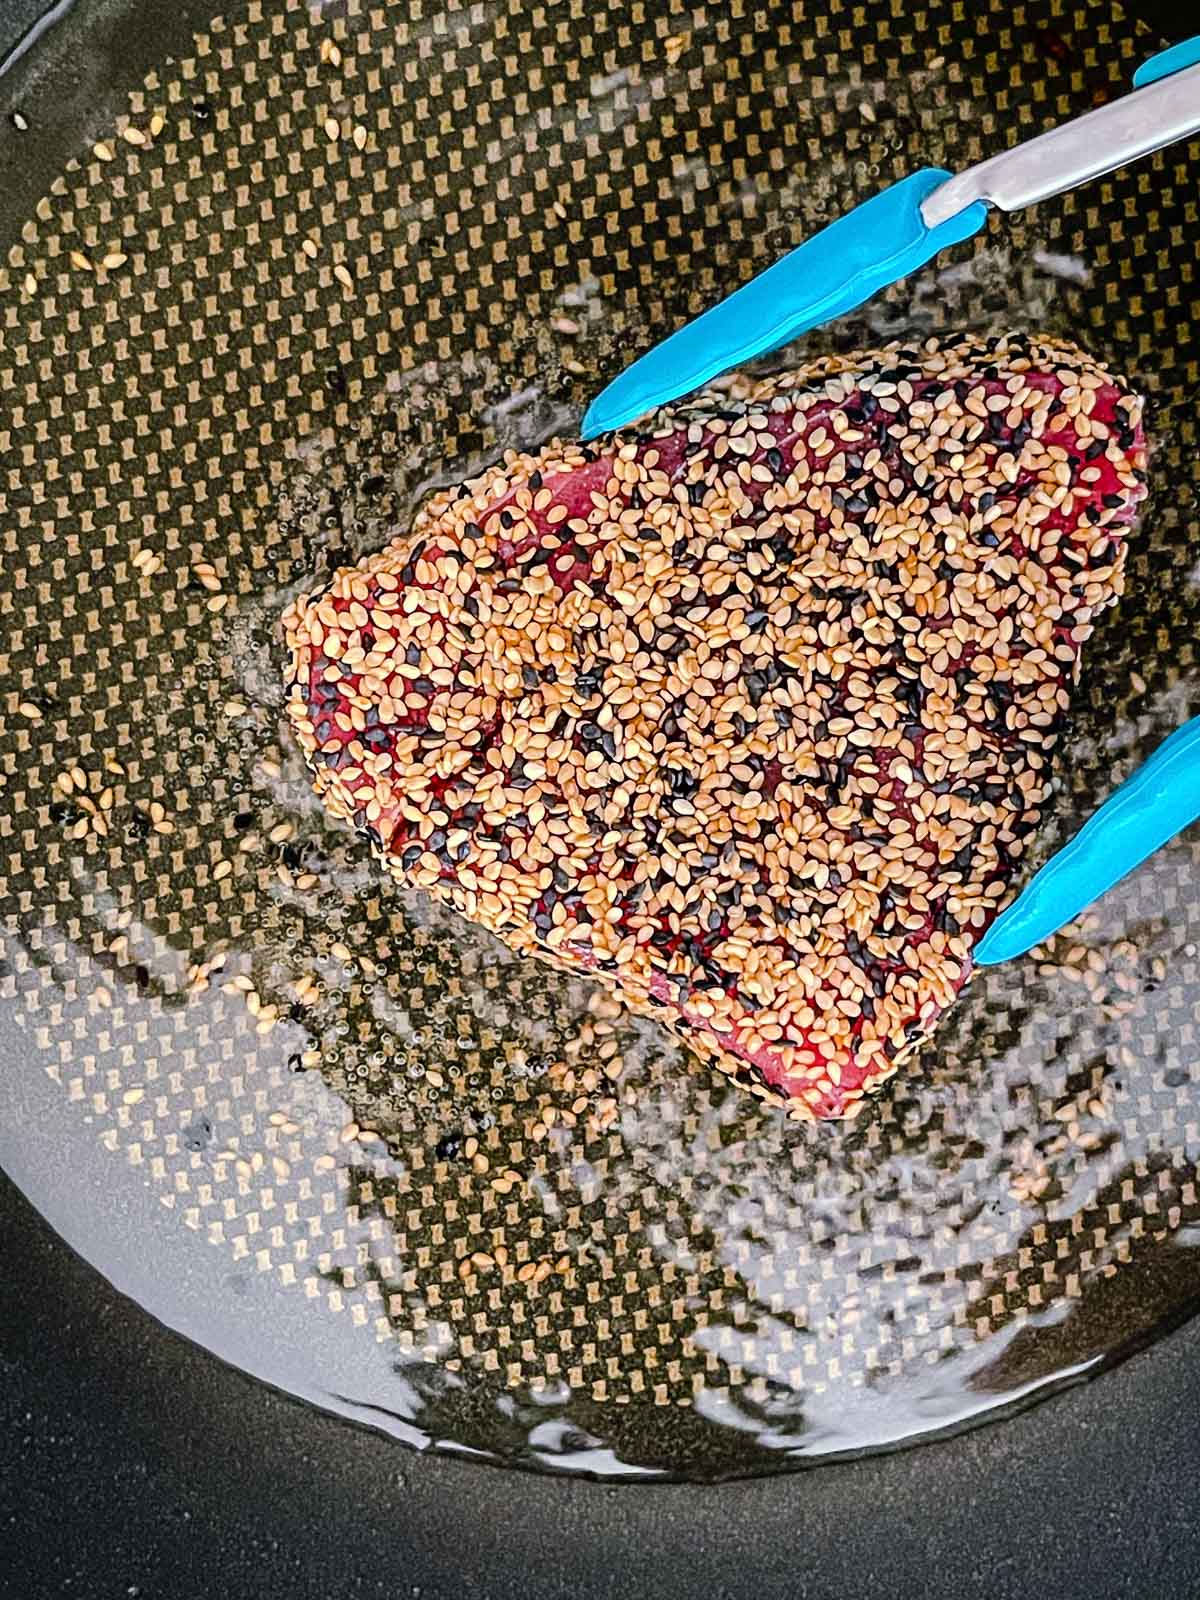 Blue tongs grabbing a tuna steak coated with sesame seeds that's been frying in a frying pan with oil.